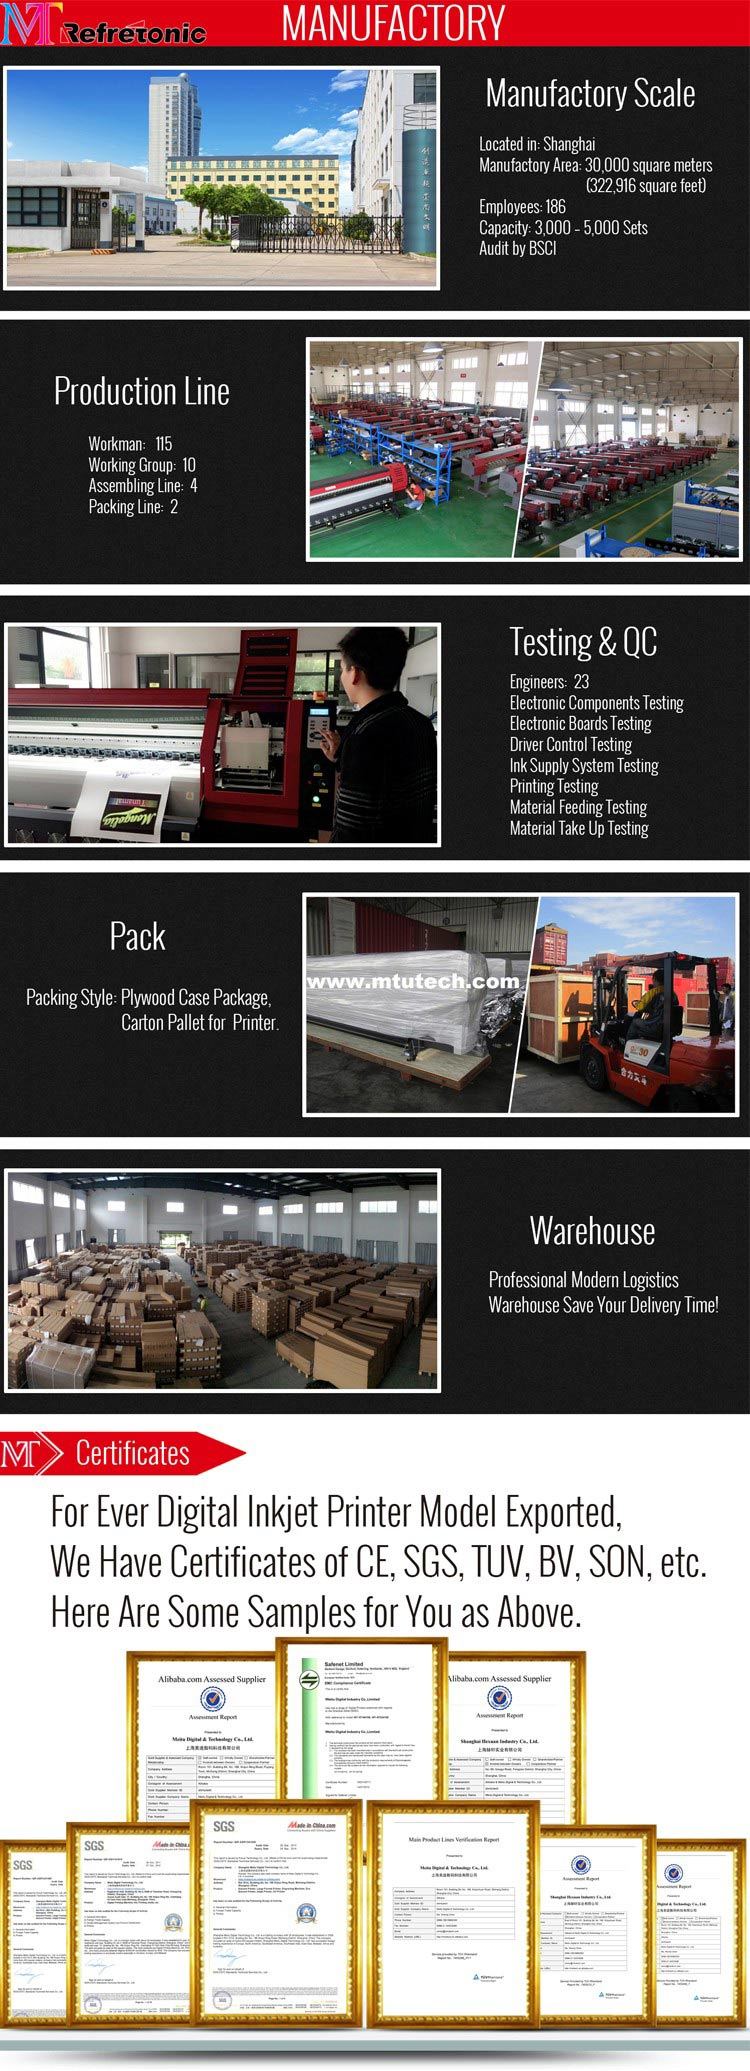 Belt Acid Textile Printer for Silk and Wool Fabric Direct Printing